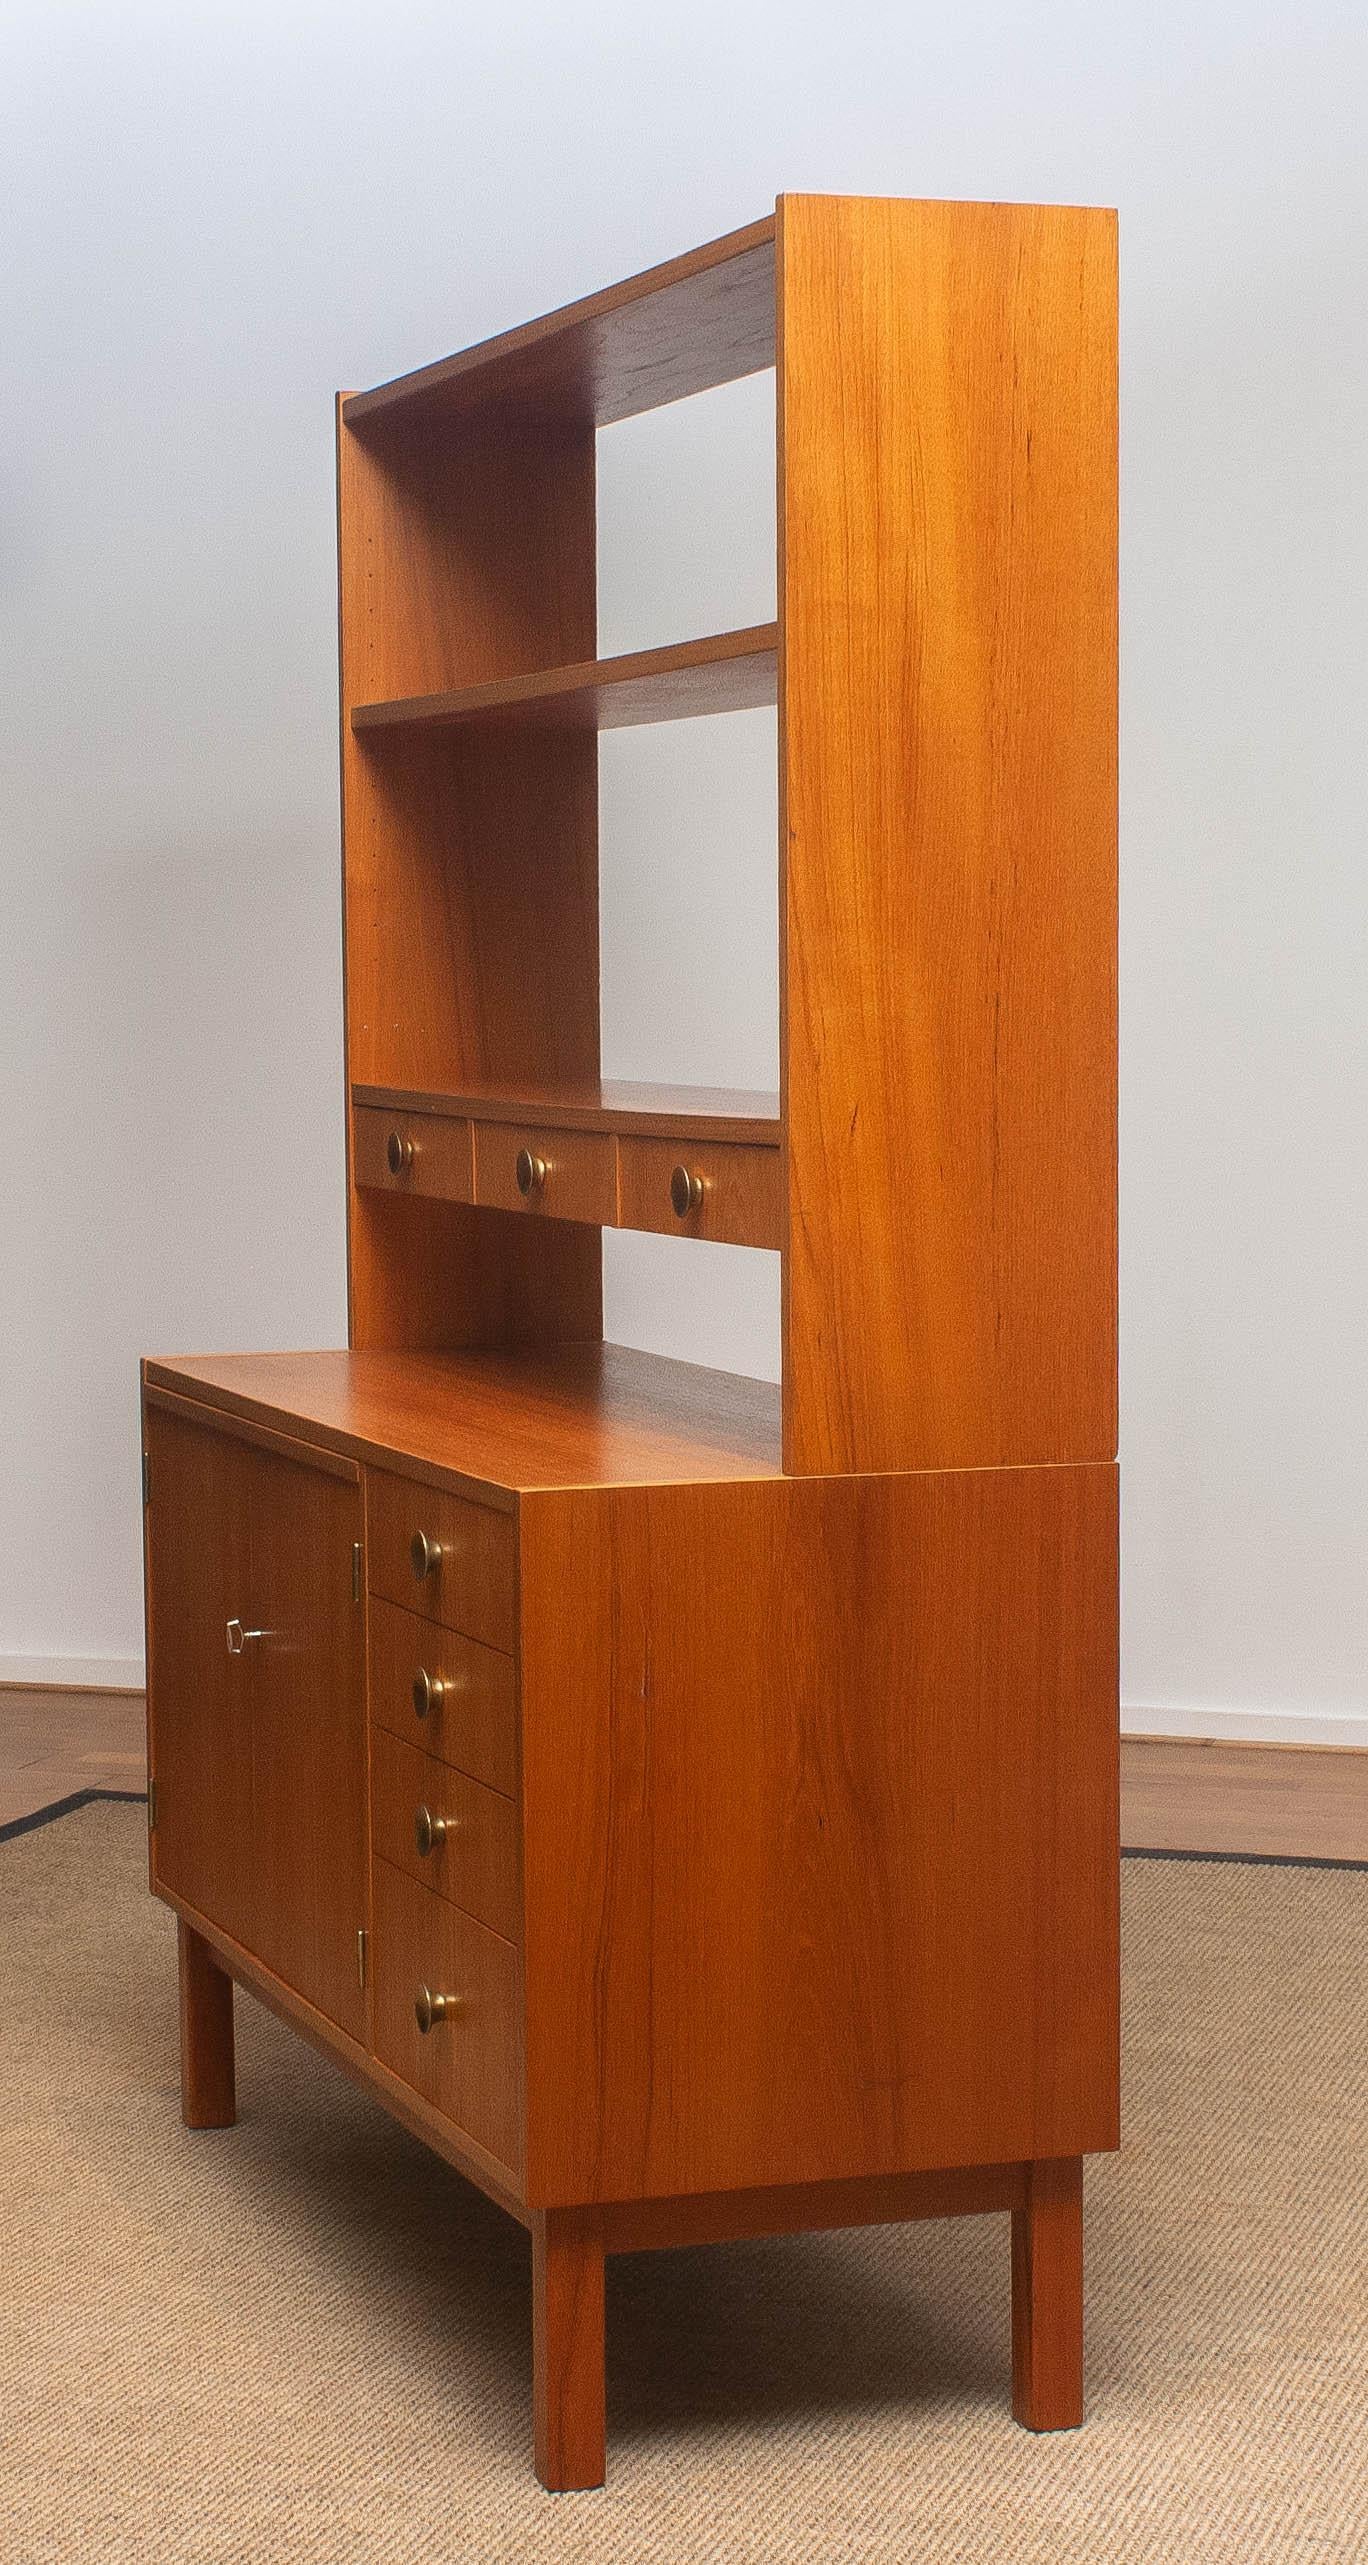 1950s Teak Veneer and Brass Bookshelves Cabinet with Writing Space from Sweden 9